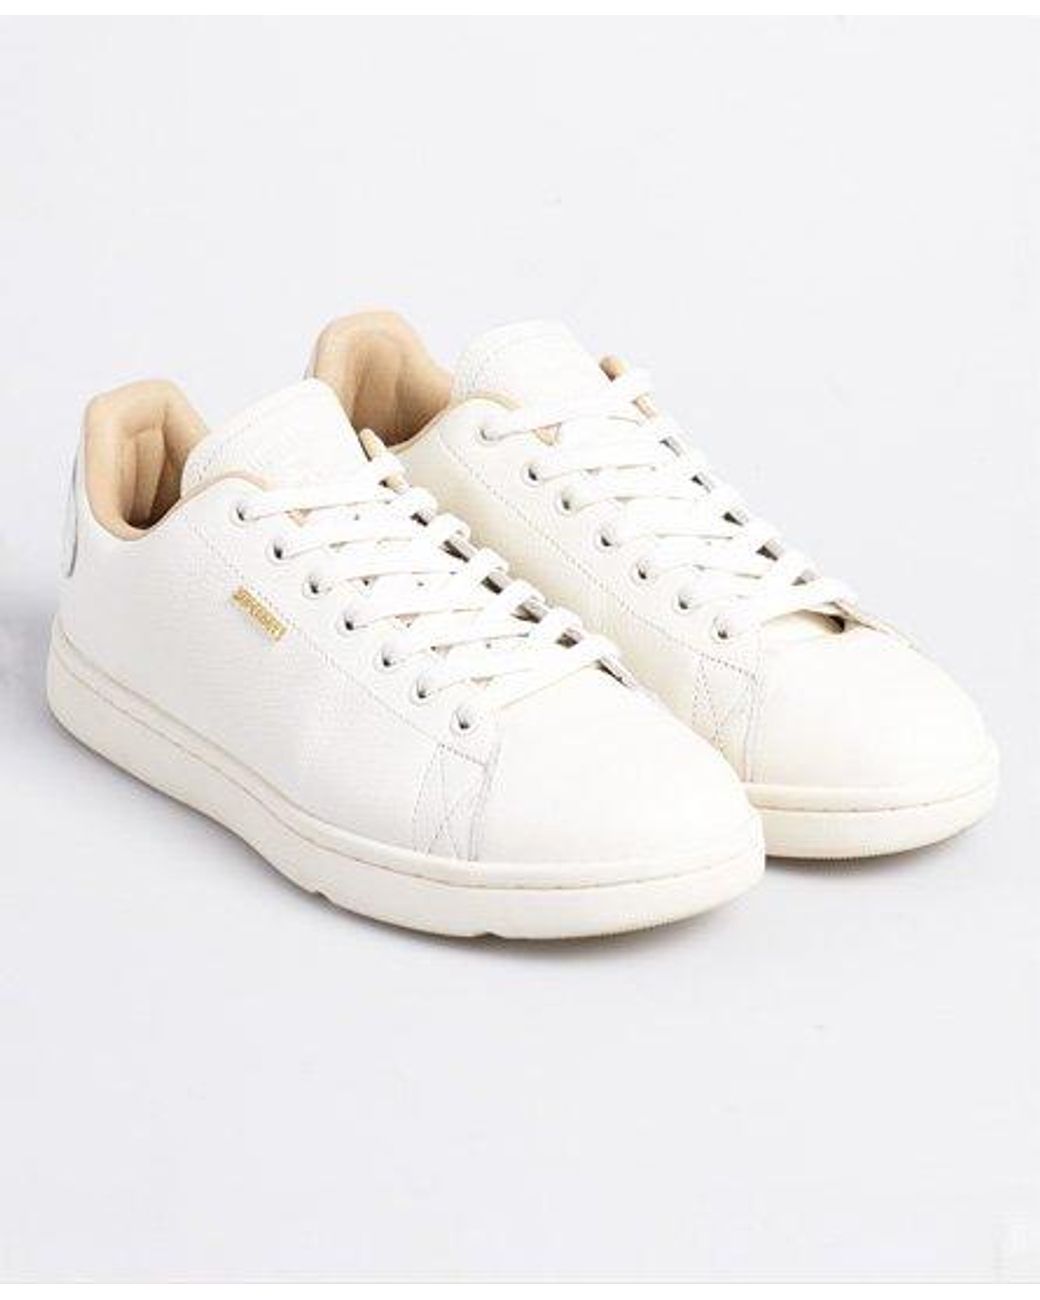 Superdry Leather Premium Vintage Tennis Trainers in White | Lyst Canada